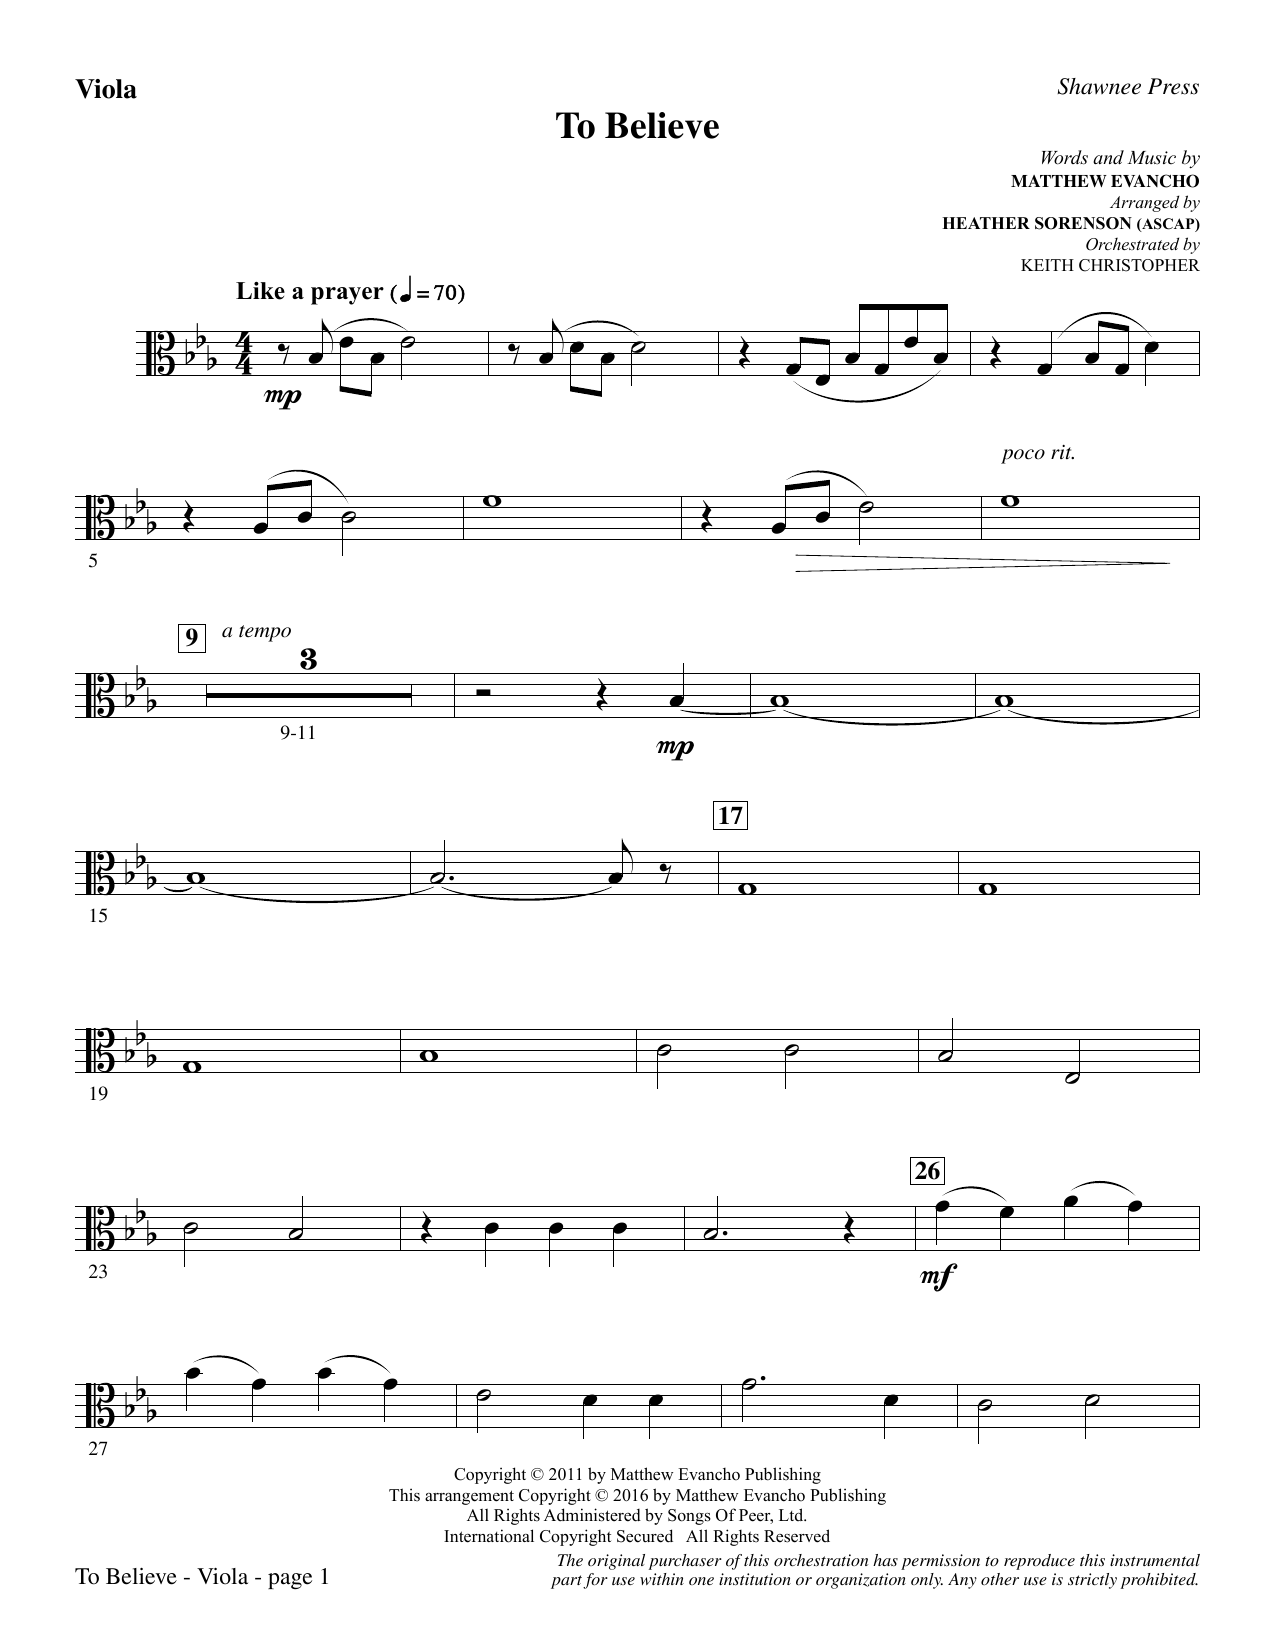 Download Heather Sorenson To Believe - Viola sheet music and printable PDF score & Inspirational music notes